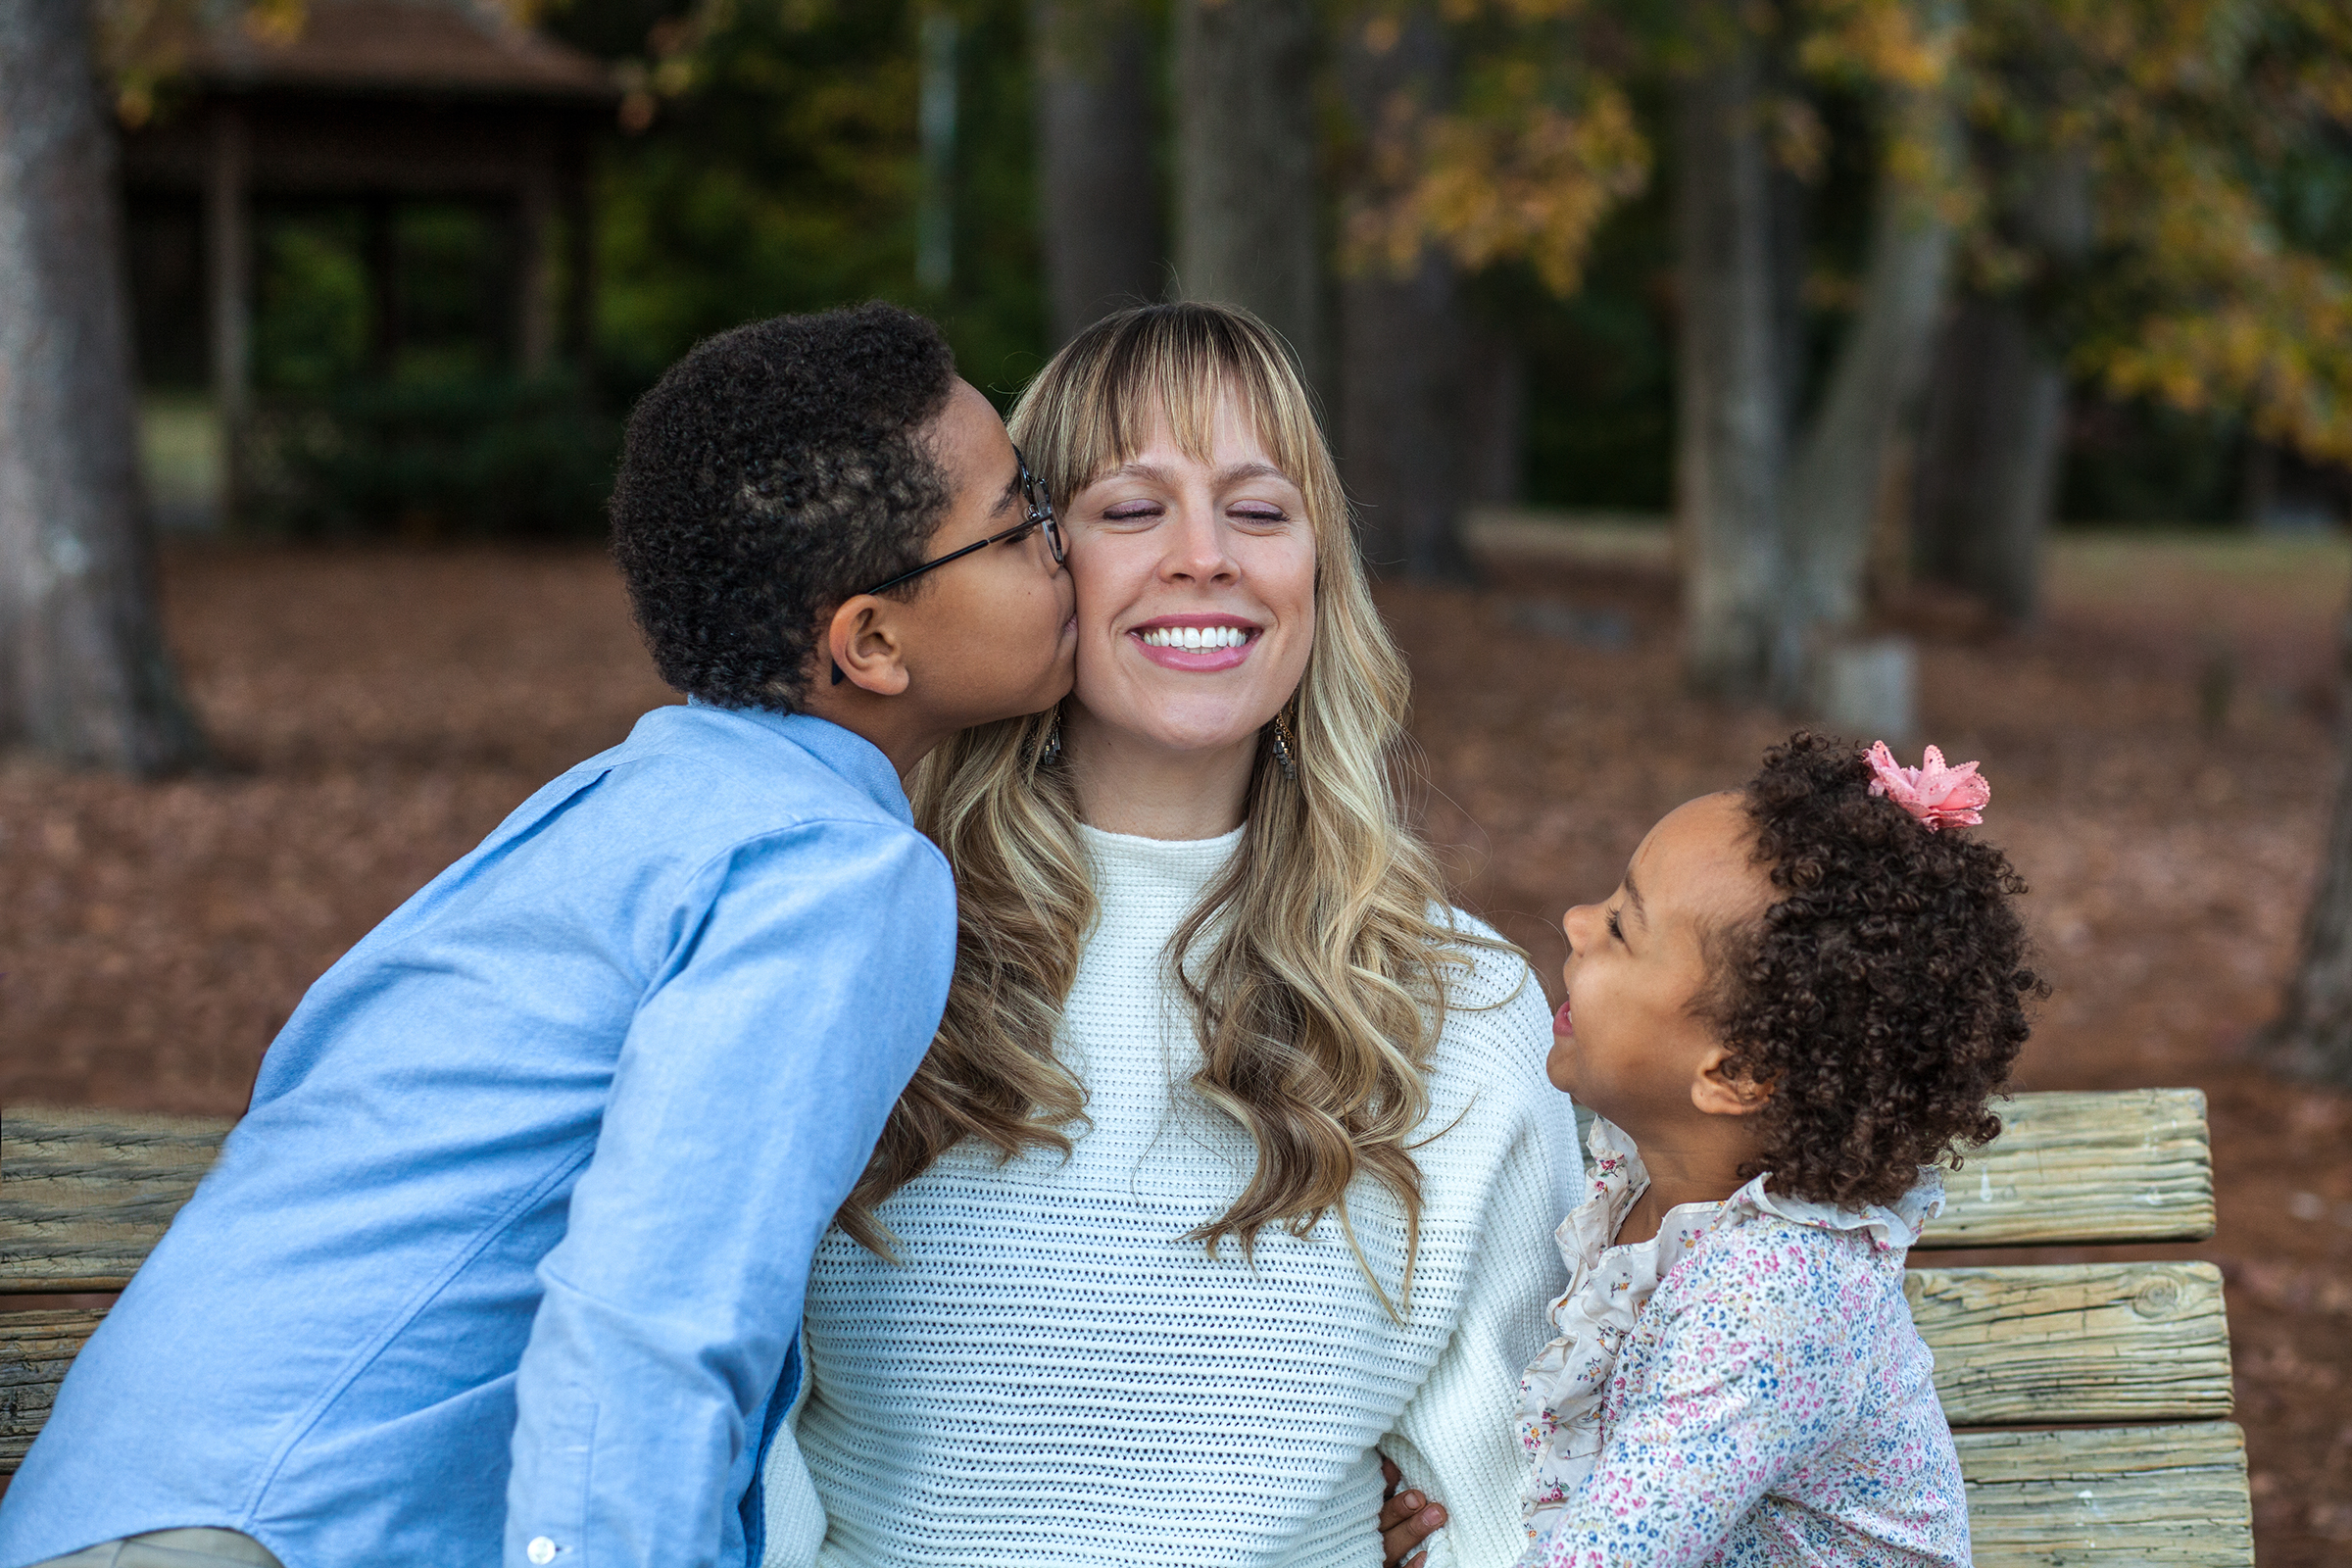 Lauren Hise is an Atlanta surrogate mother who created a Facebook group to support moms pregnant and stressed during the coronavirus pandemic.